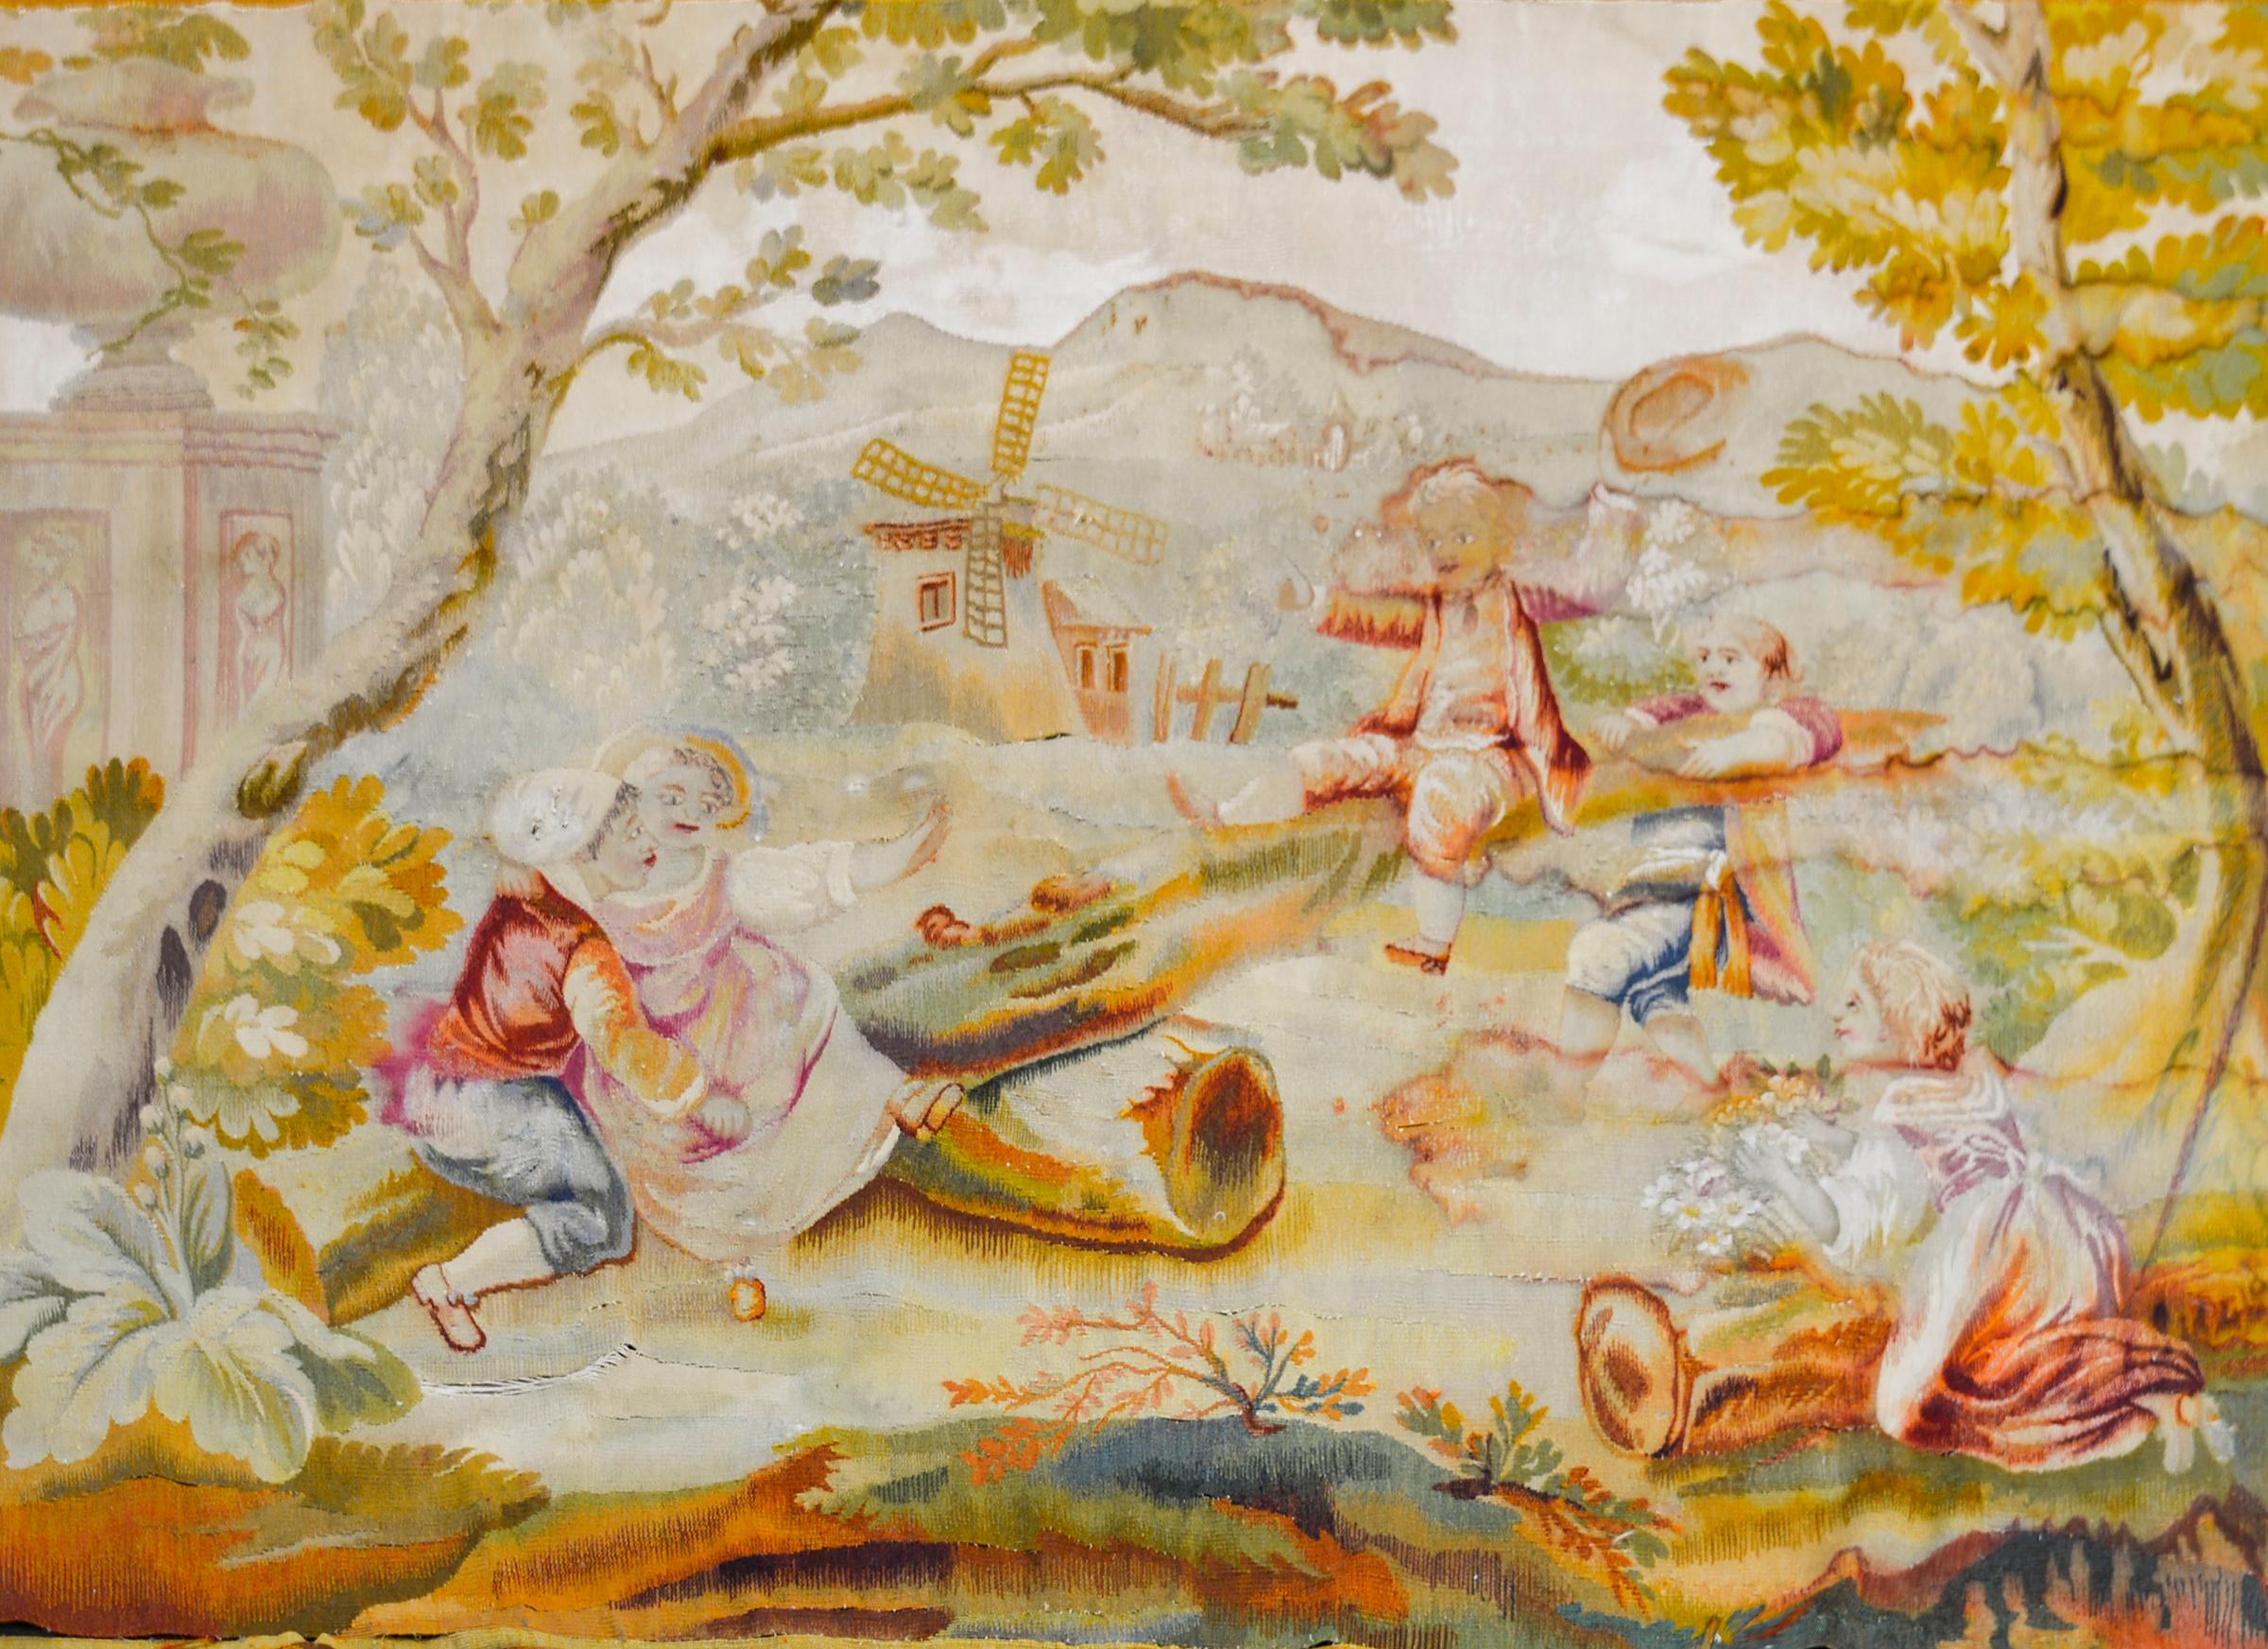 A wonderful mid 19th century French Aubusson tapestry depicting several children in period clothing playing on a log teeter-totter under an oak tree, and with a windmill and mountains in the background. The border is bold with a large-scale acanthus